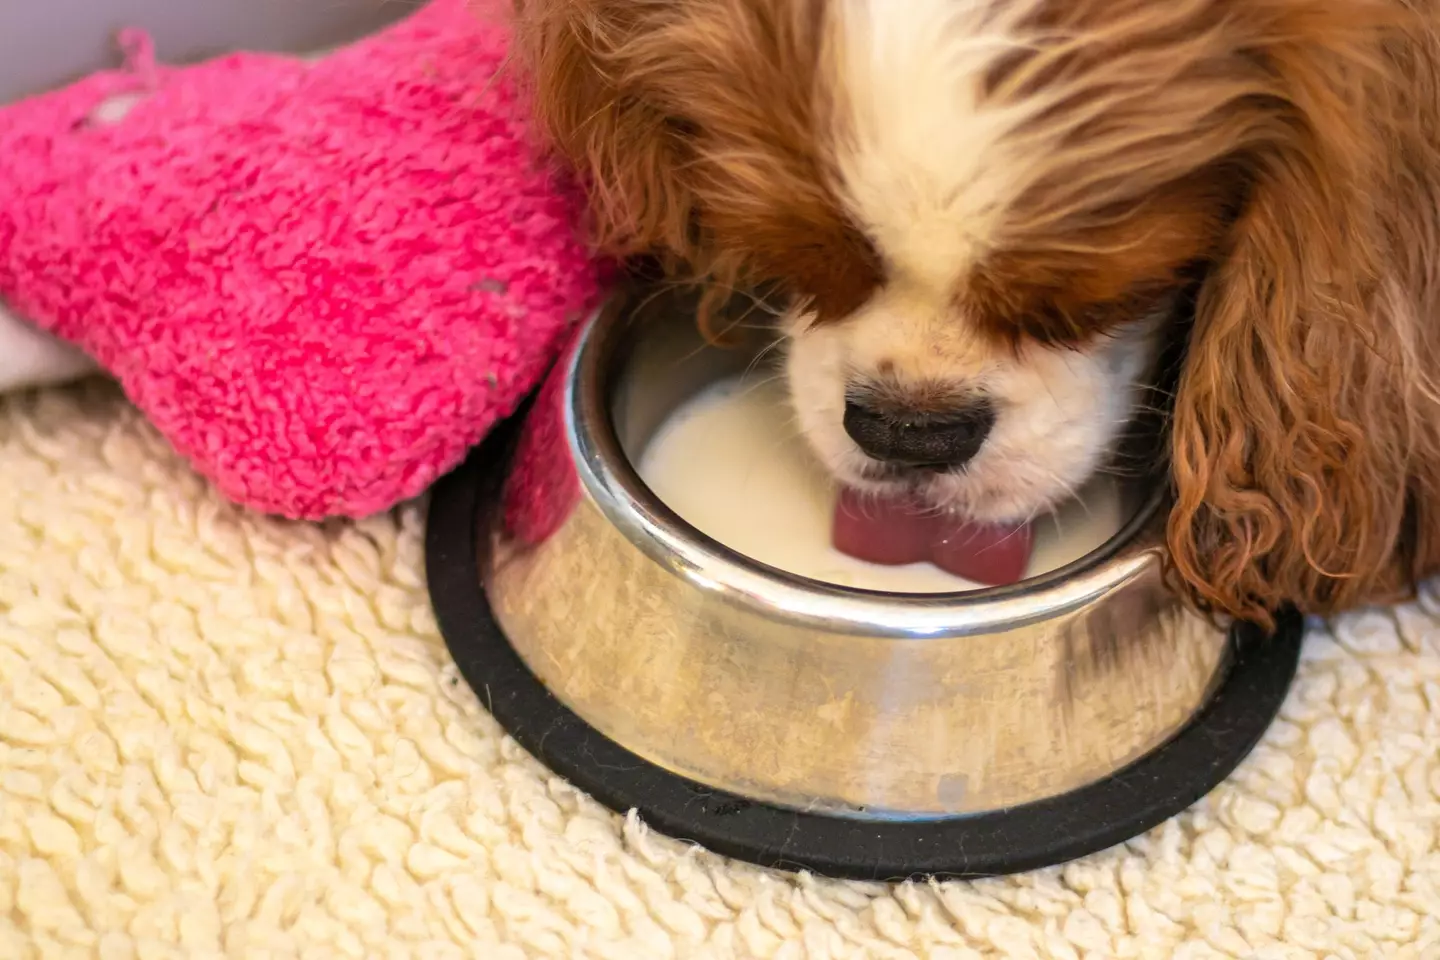 Experts are warning dog owners to take extra care over their pets' food bowls (